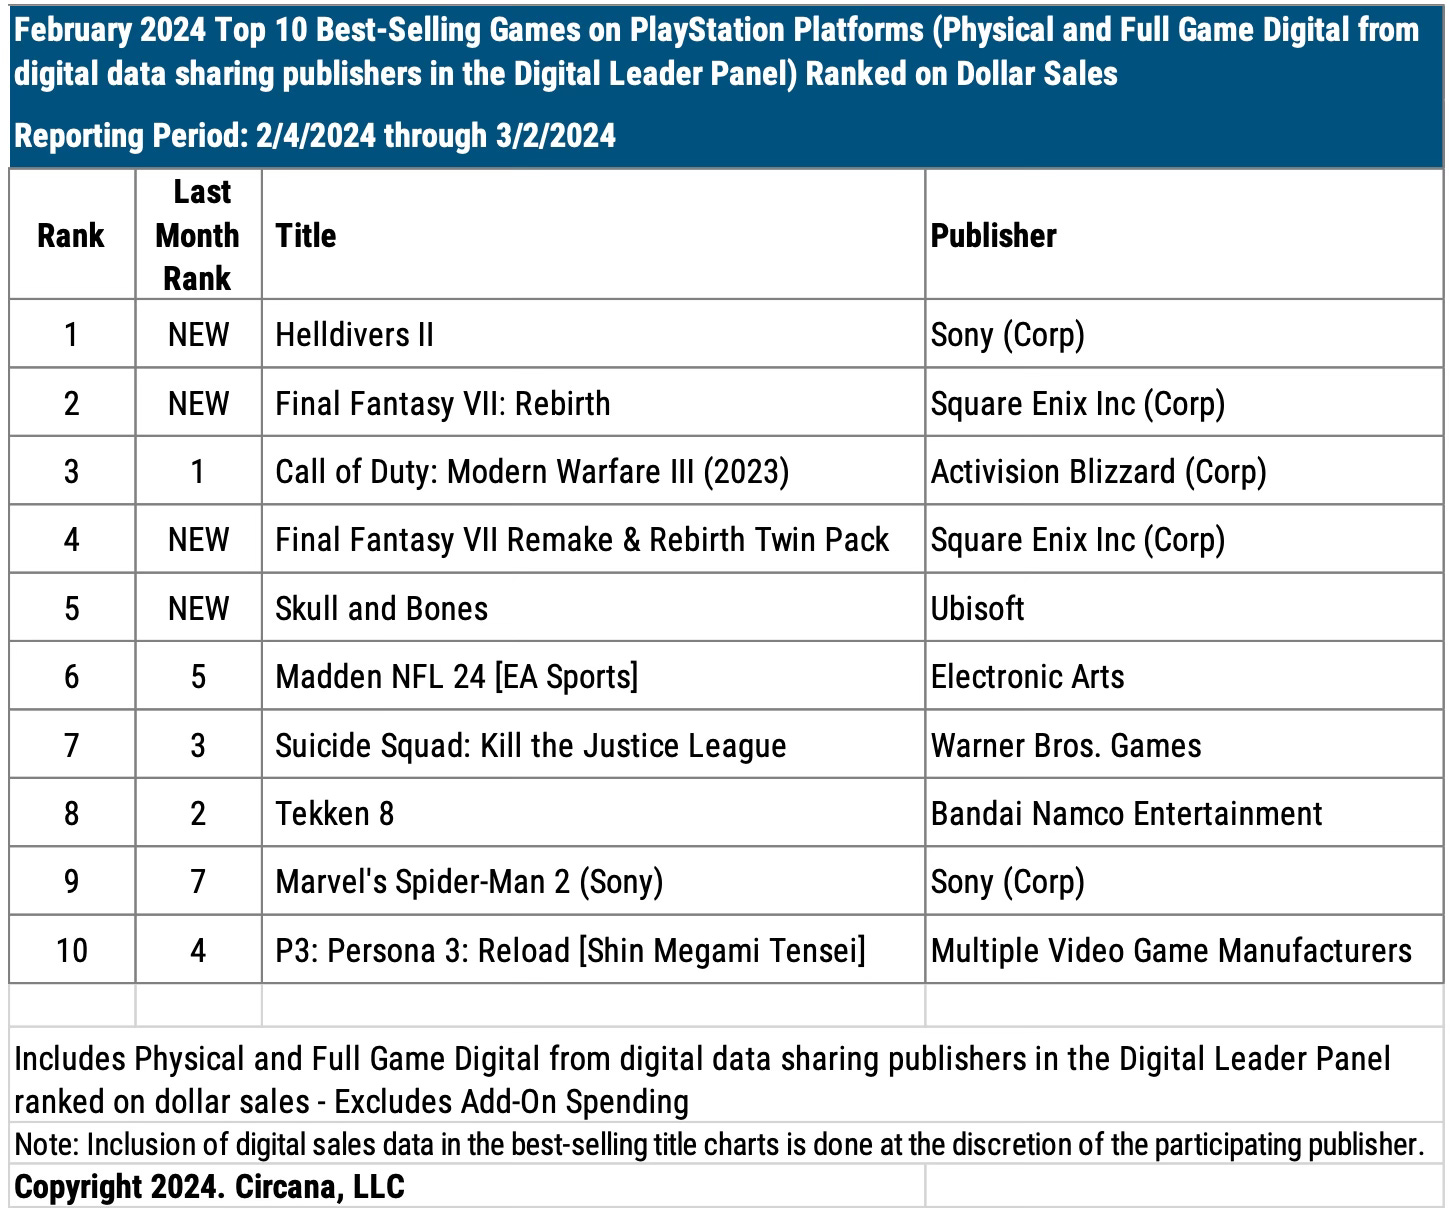 Chart showing the top 10 best-selling games on PlayStation platforms in February 2024